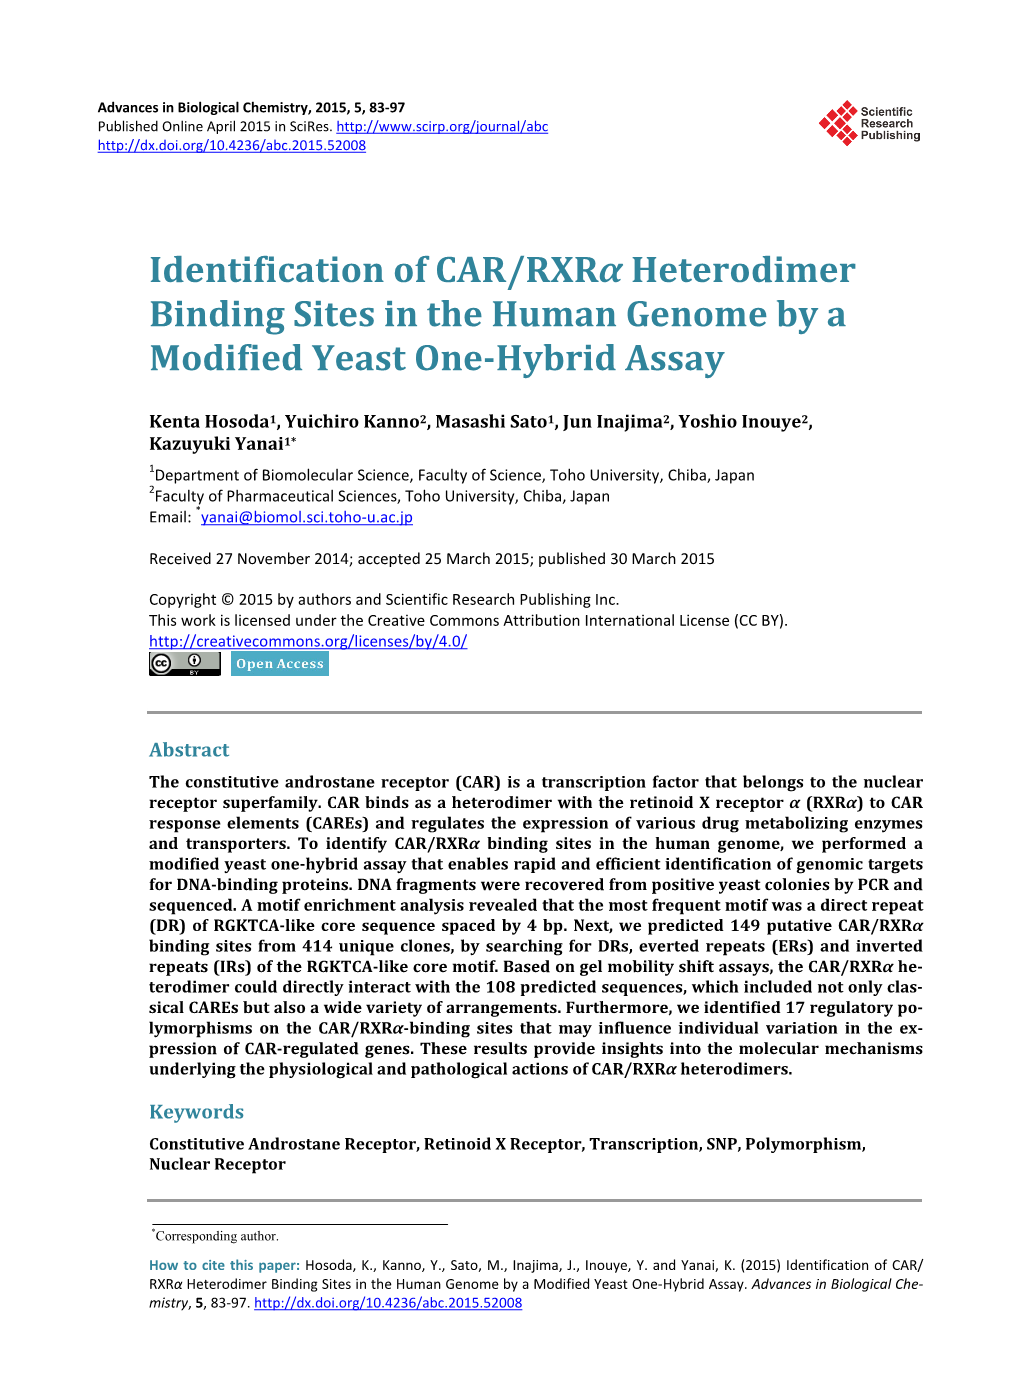 Identification of CAR/Rxrα Heterodimer Binding Sites in the Human Genome by a Modified Yeast One-Hybrid Assay